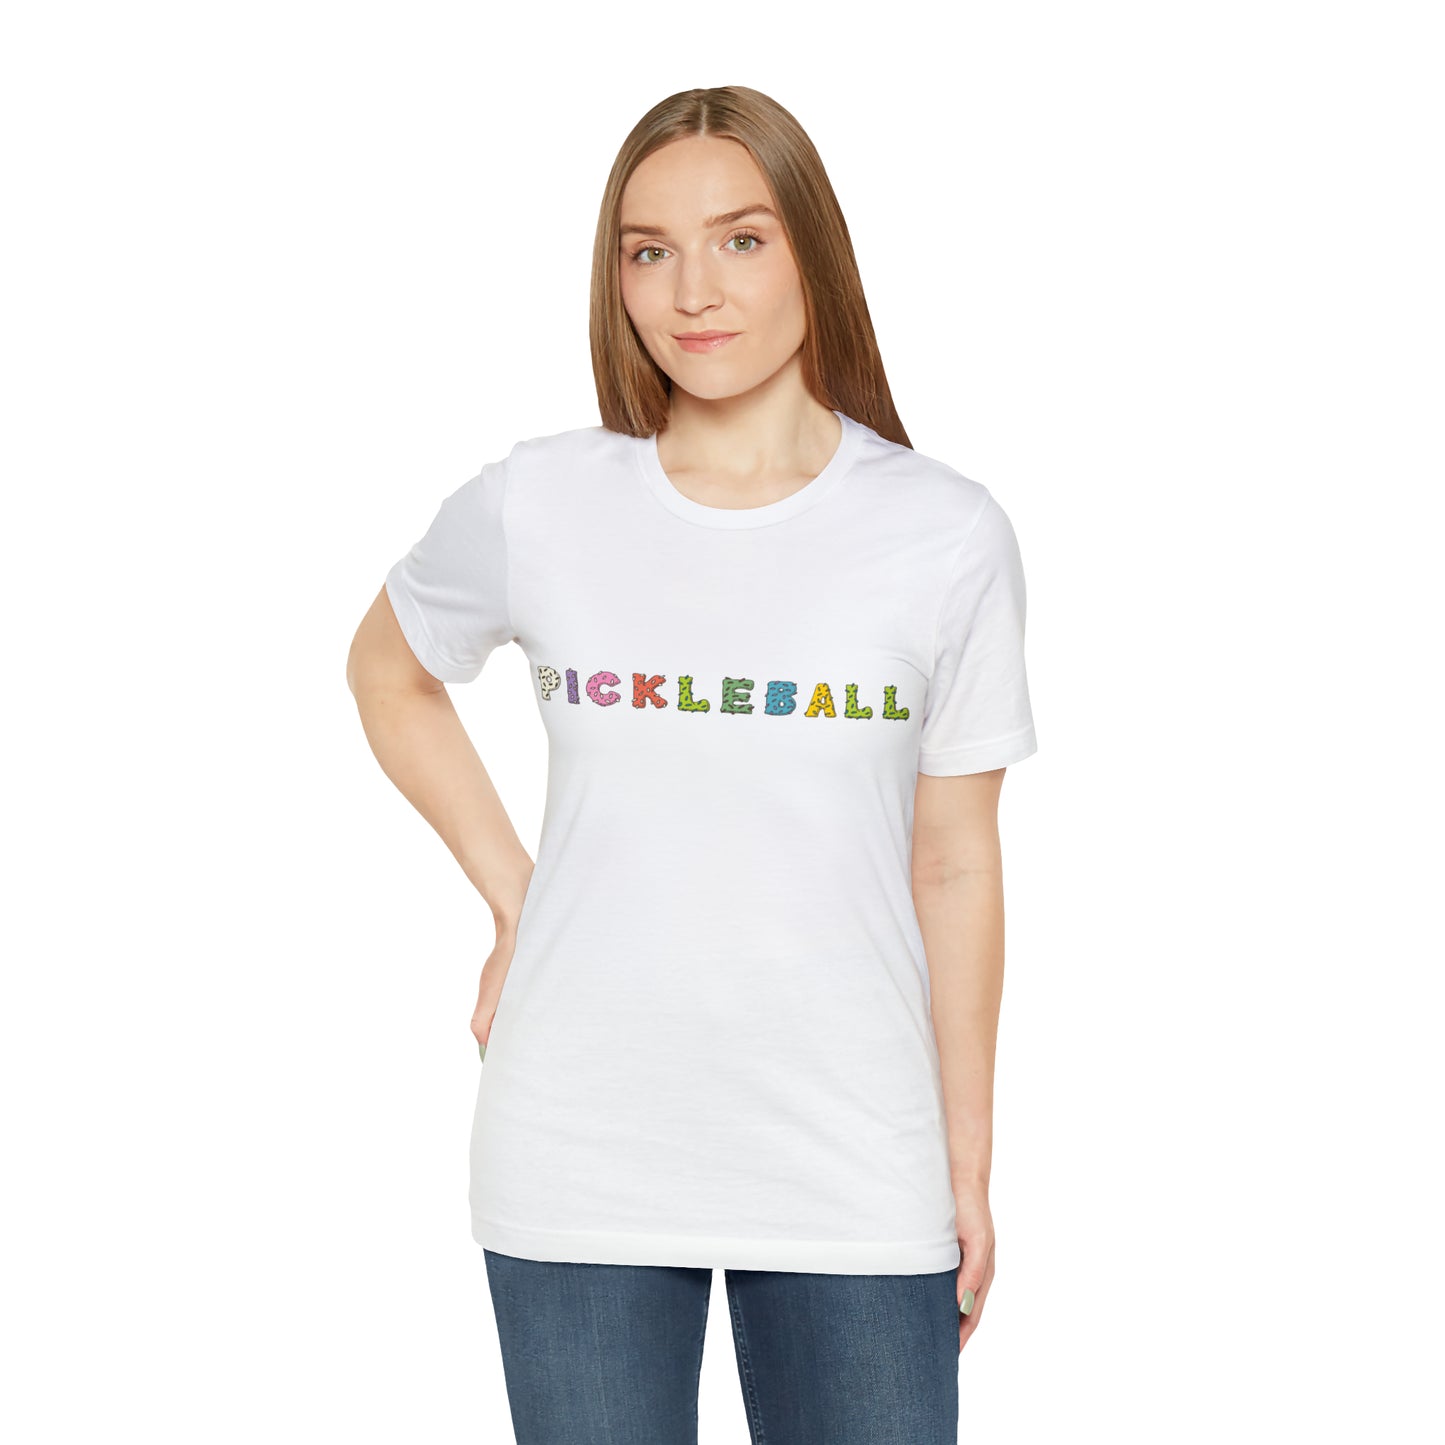 Classic Pickleball Enthusiast's Cotton Tee